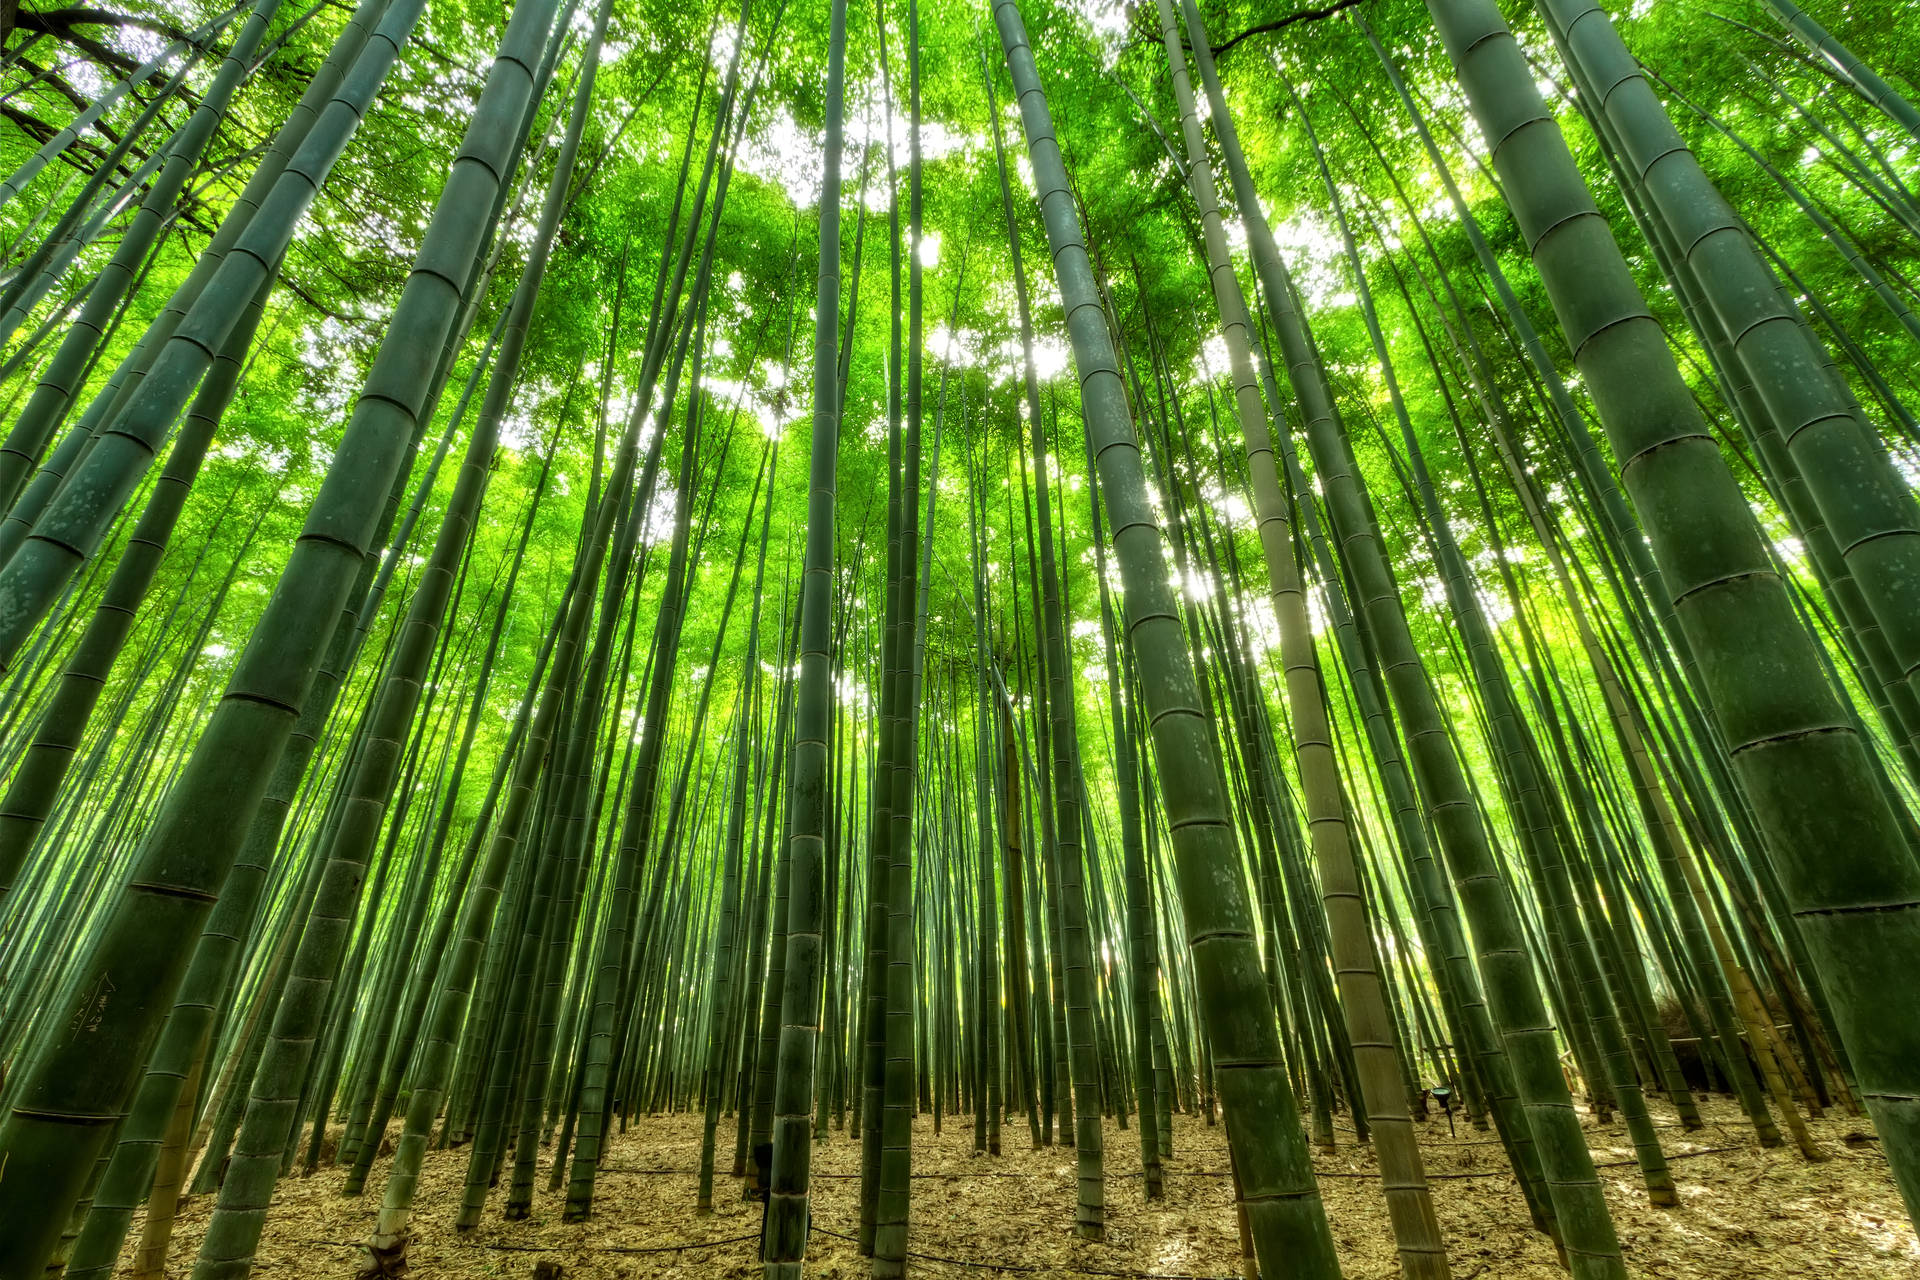 Bamboo Grove Under The Sunlight Background